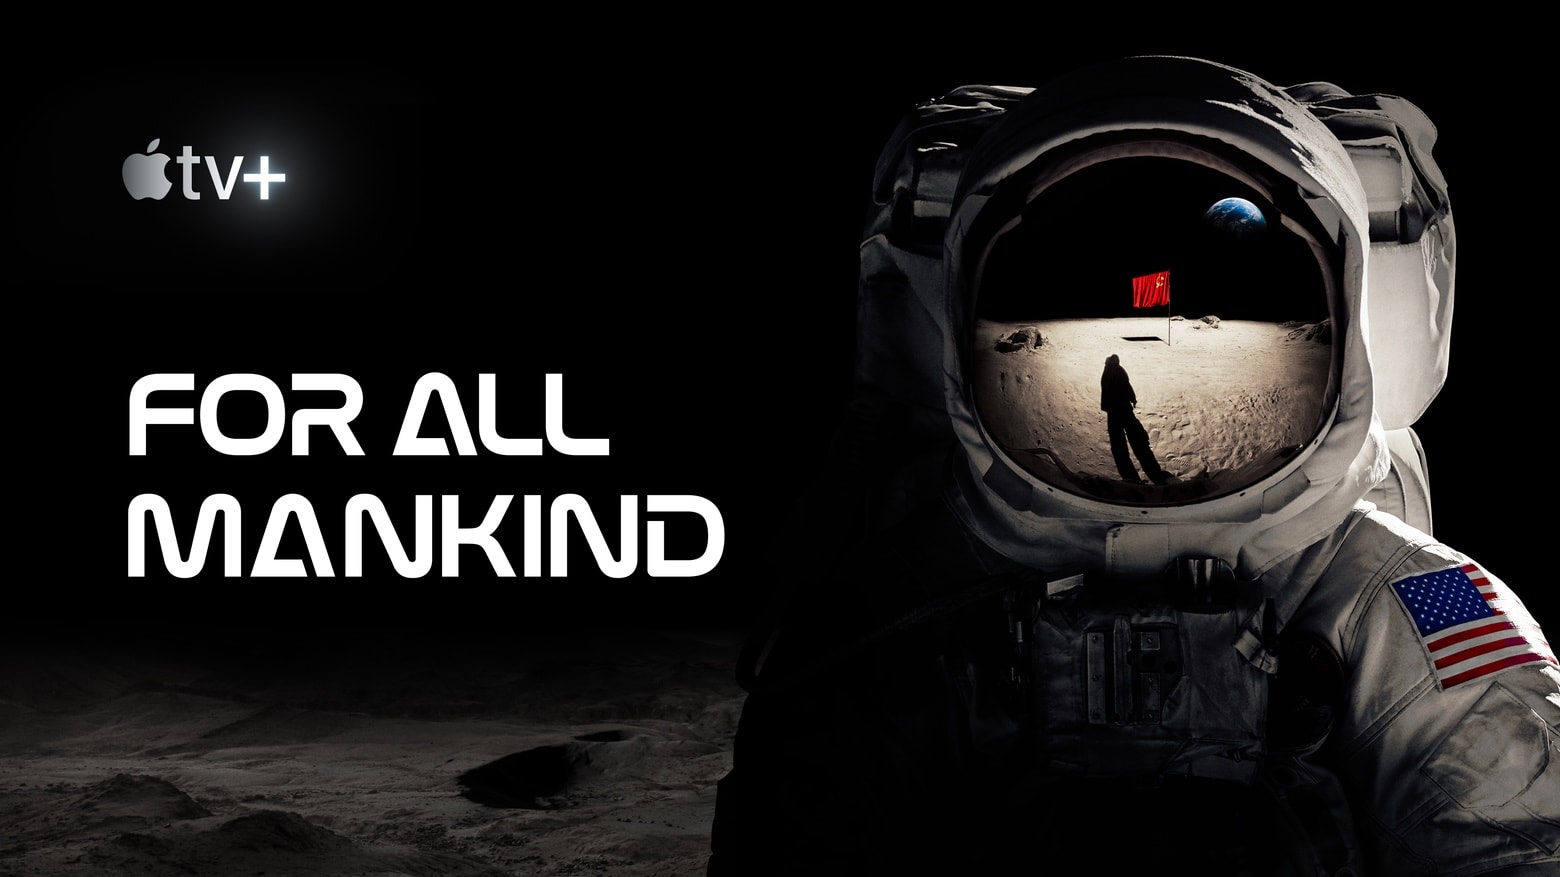 Apple starts shooting second season of For All Mankind next month